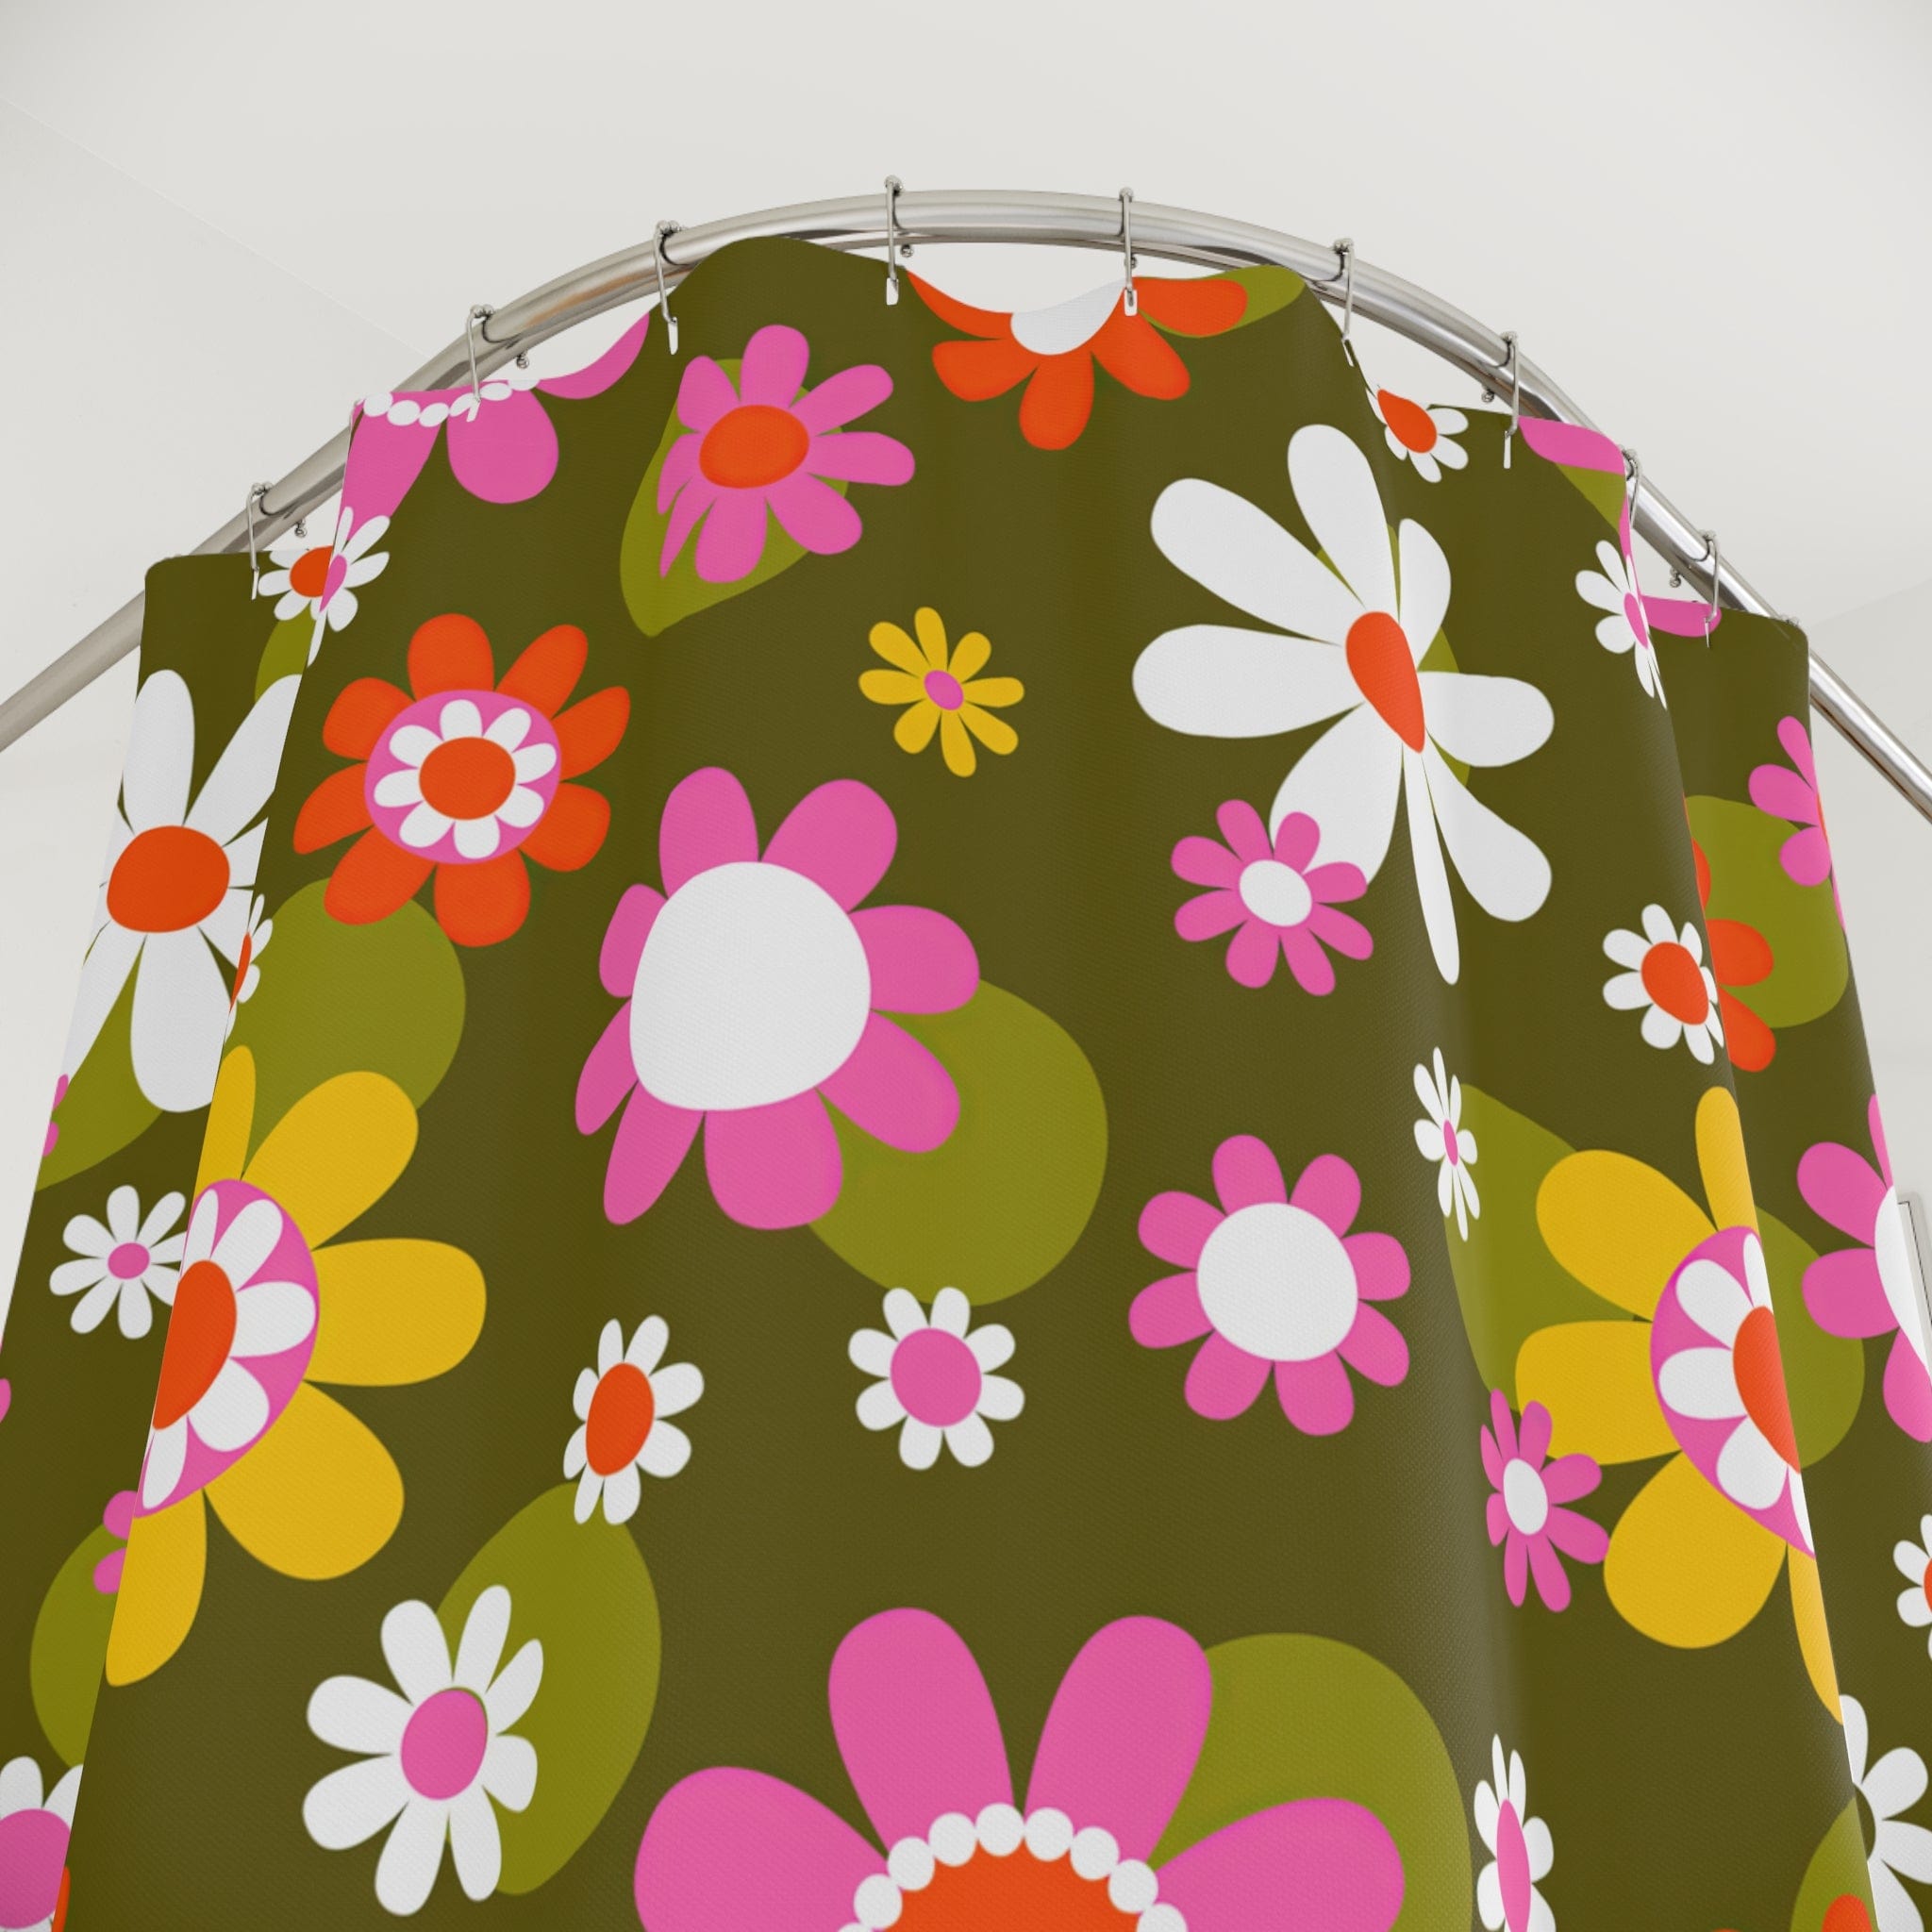 Printify Groovy Hippie Daisy Flower Power Shower Curtain Home Decor 71&quot; × 74&quot; 28036768828493988730